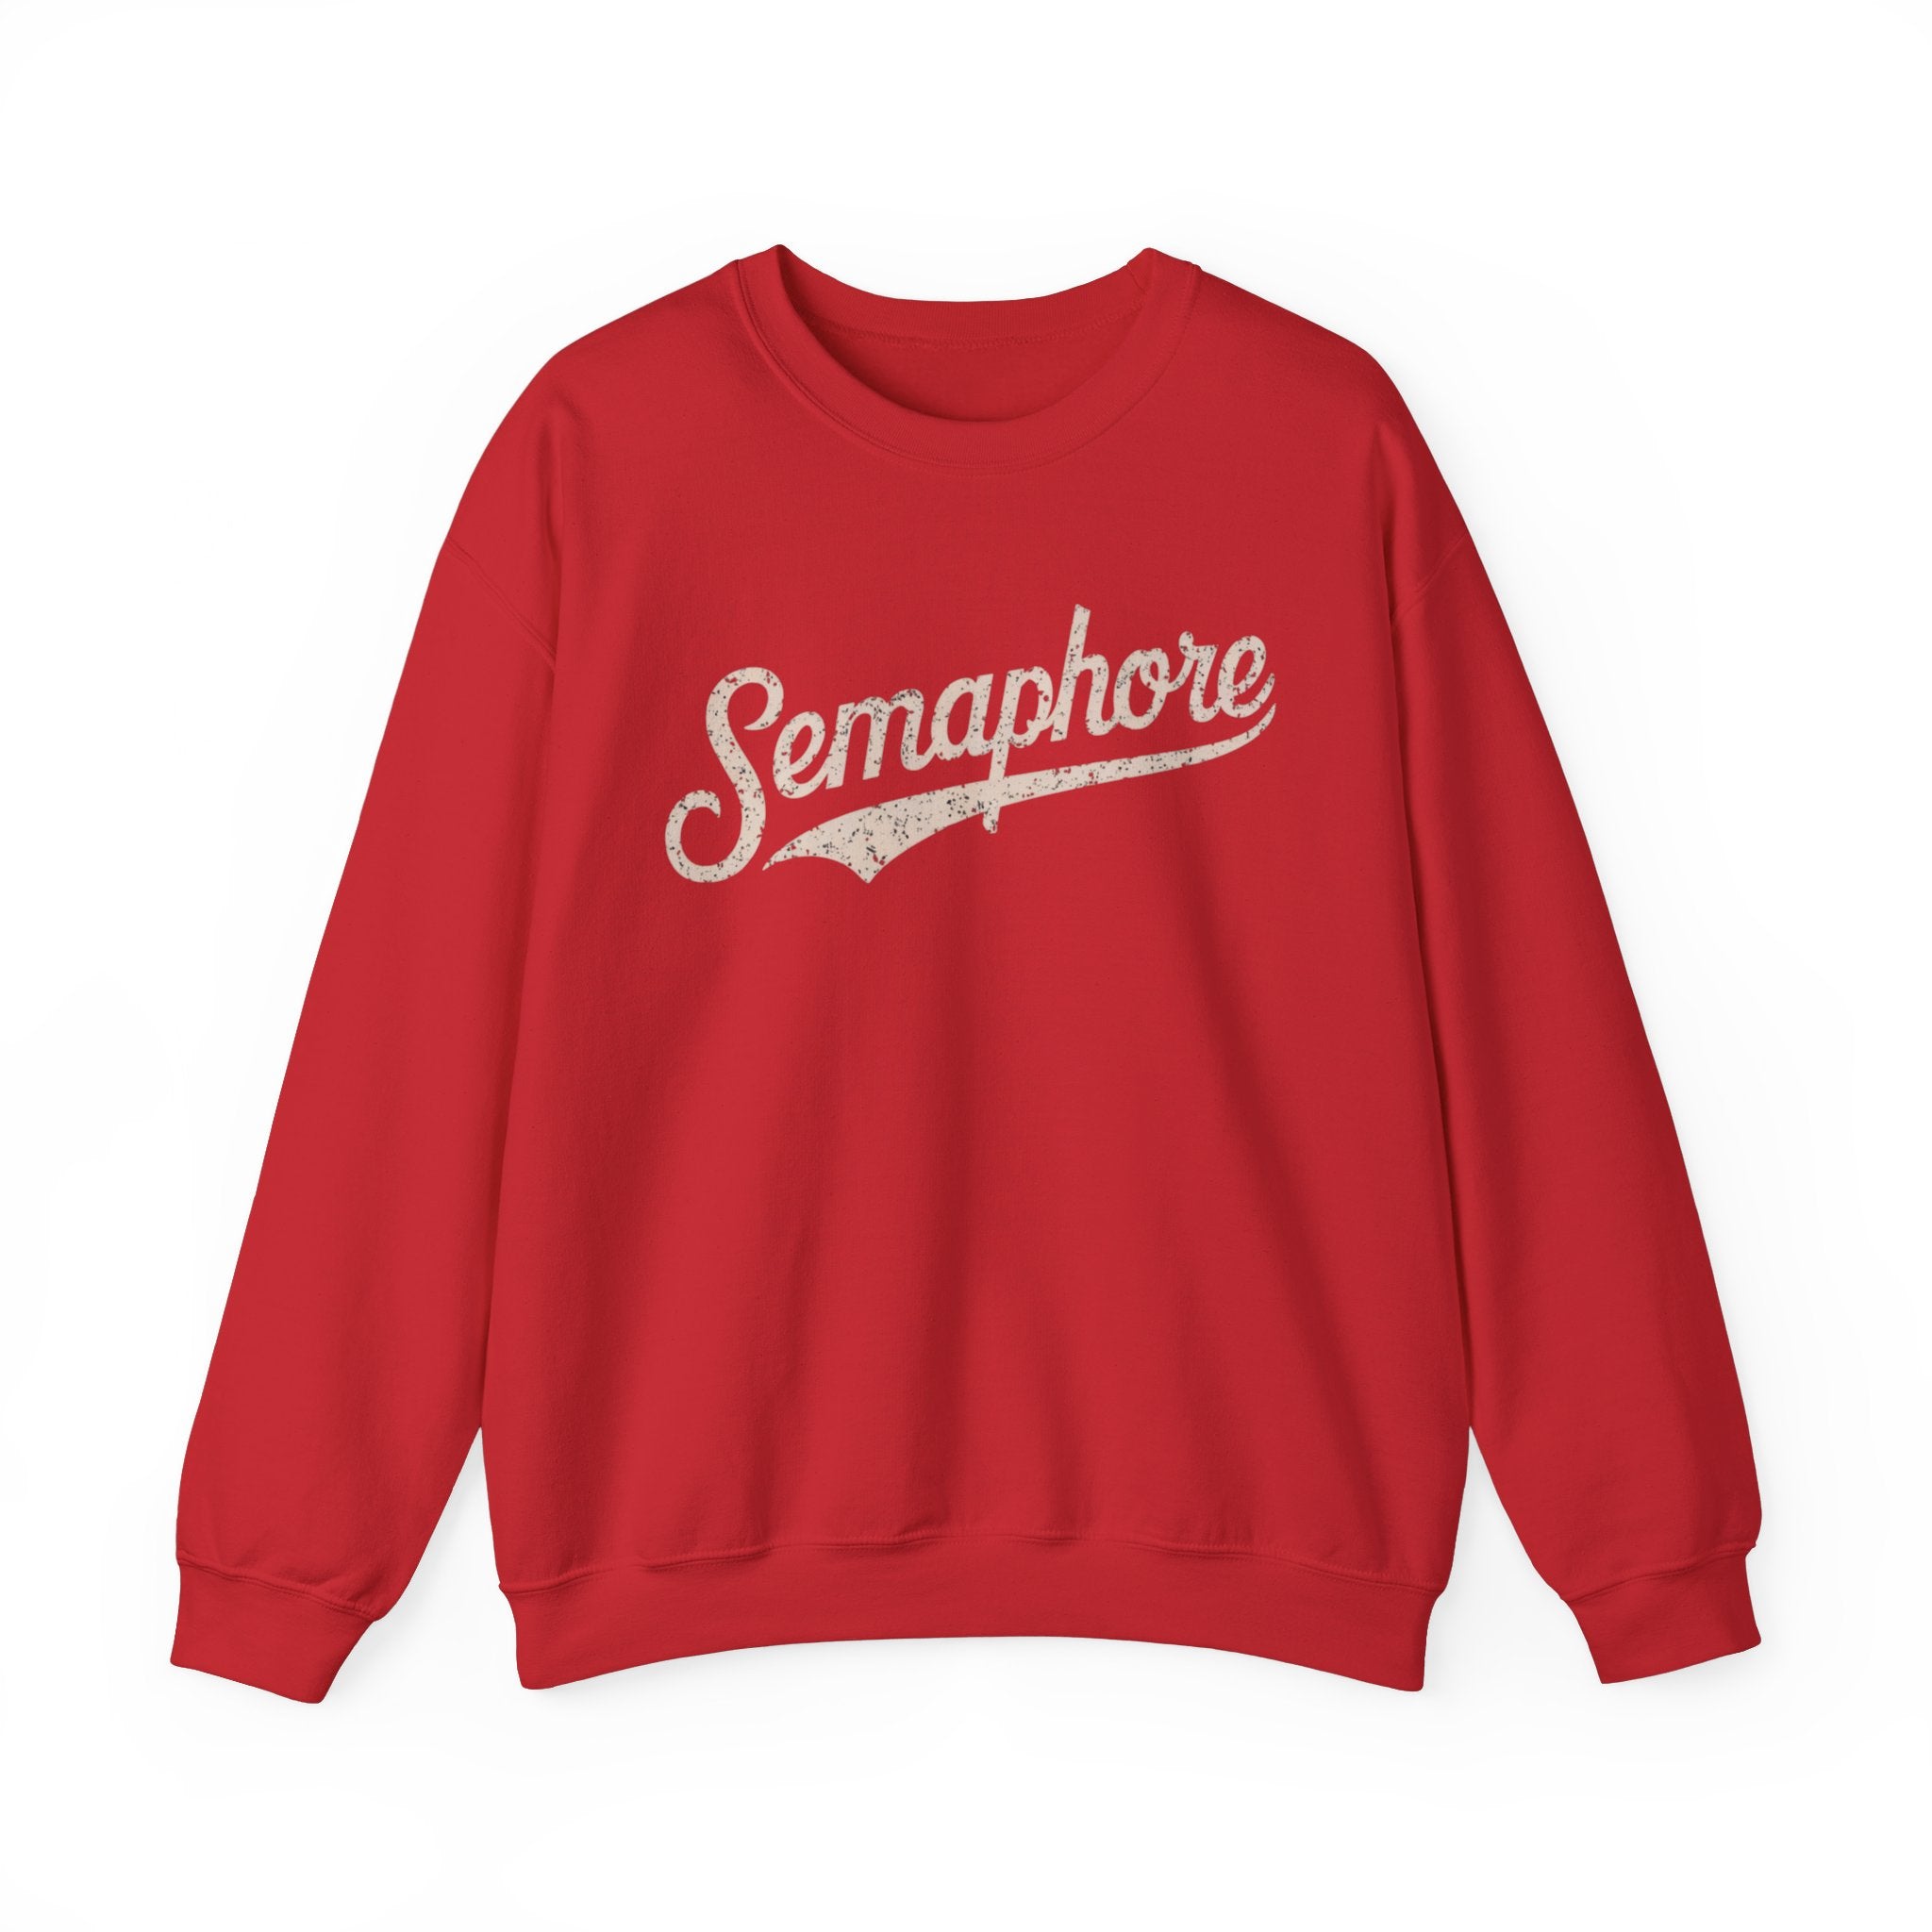 A Semaphore - Sweatshirt in red with the word "Semaphore" printed in white cursive text across the chest, offering both style and warmth.